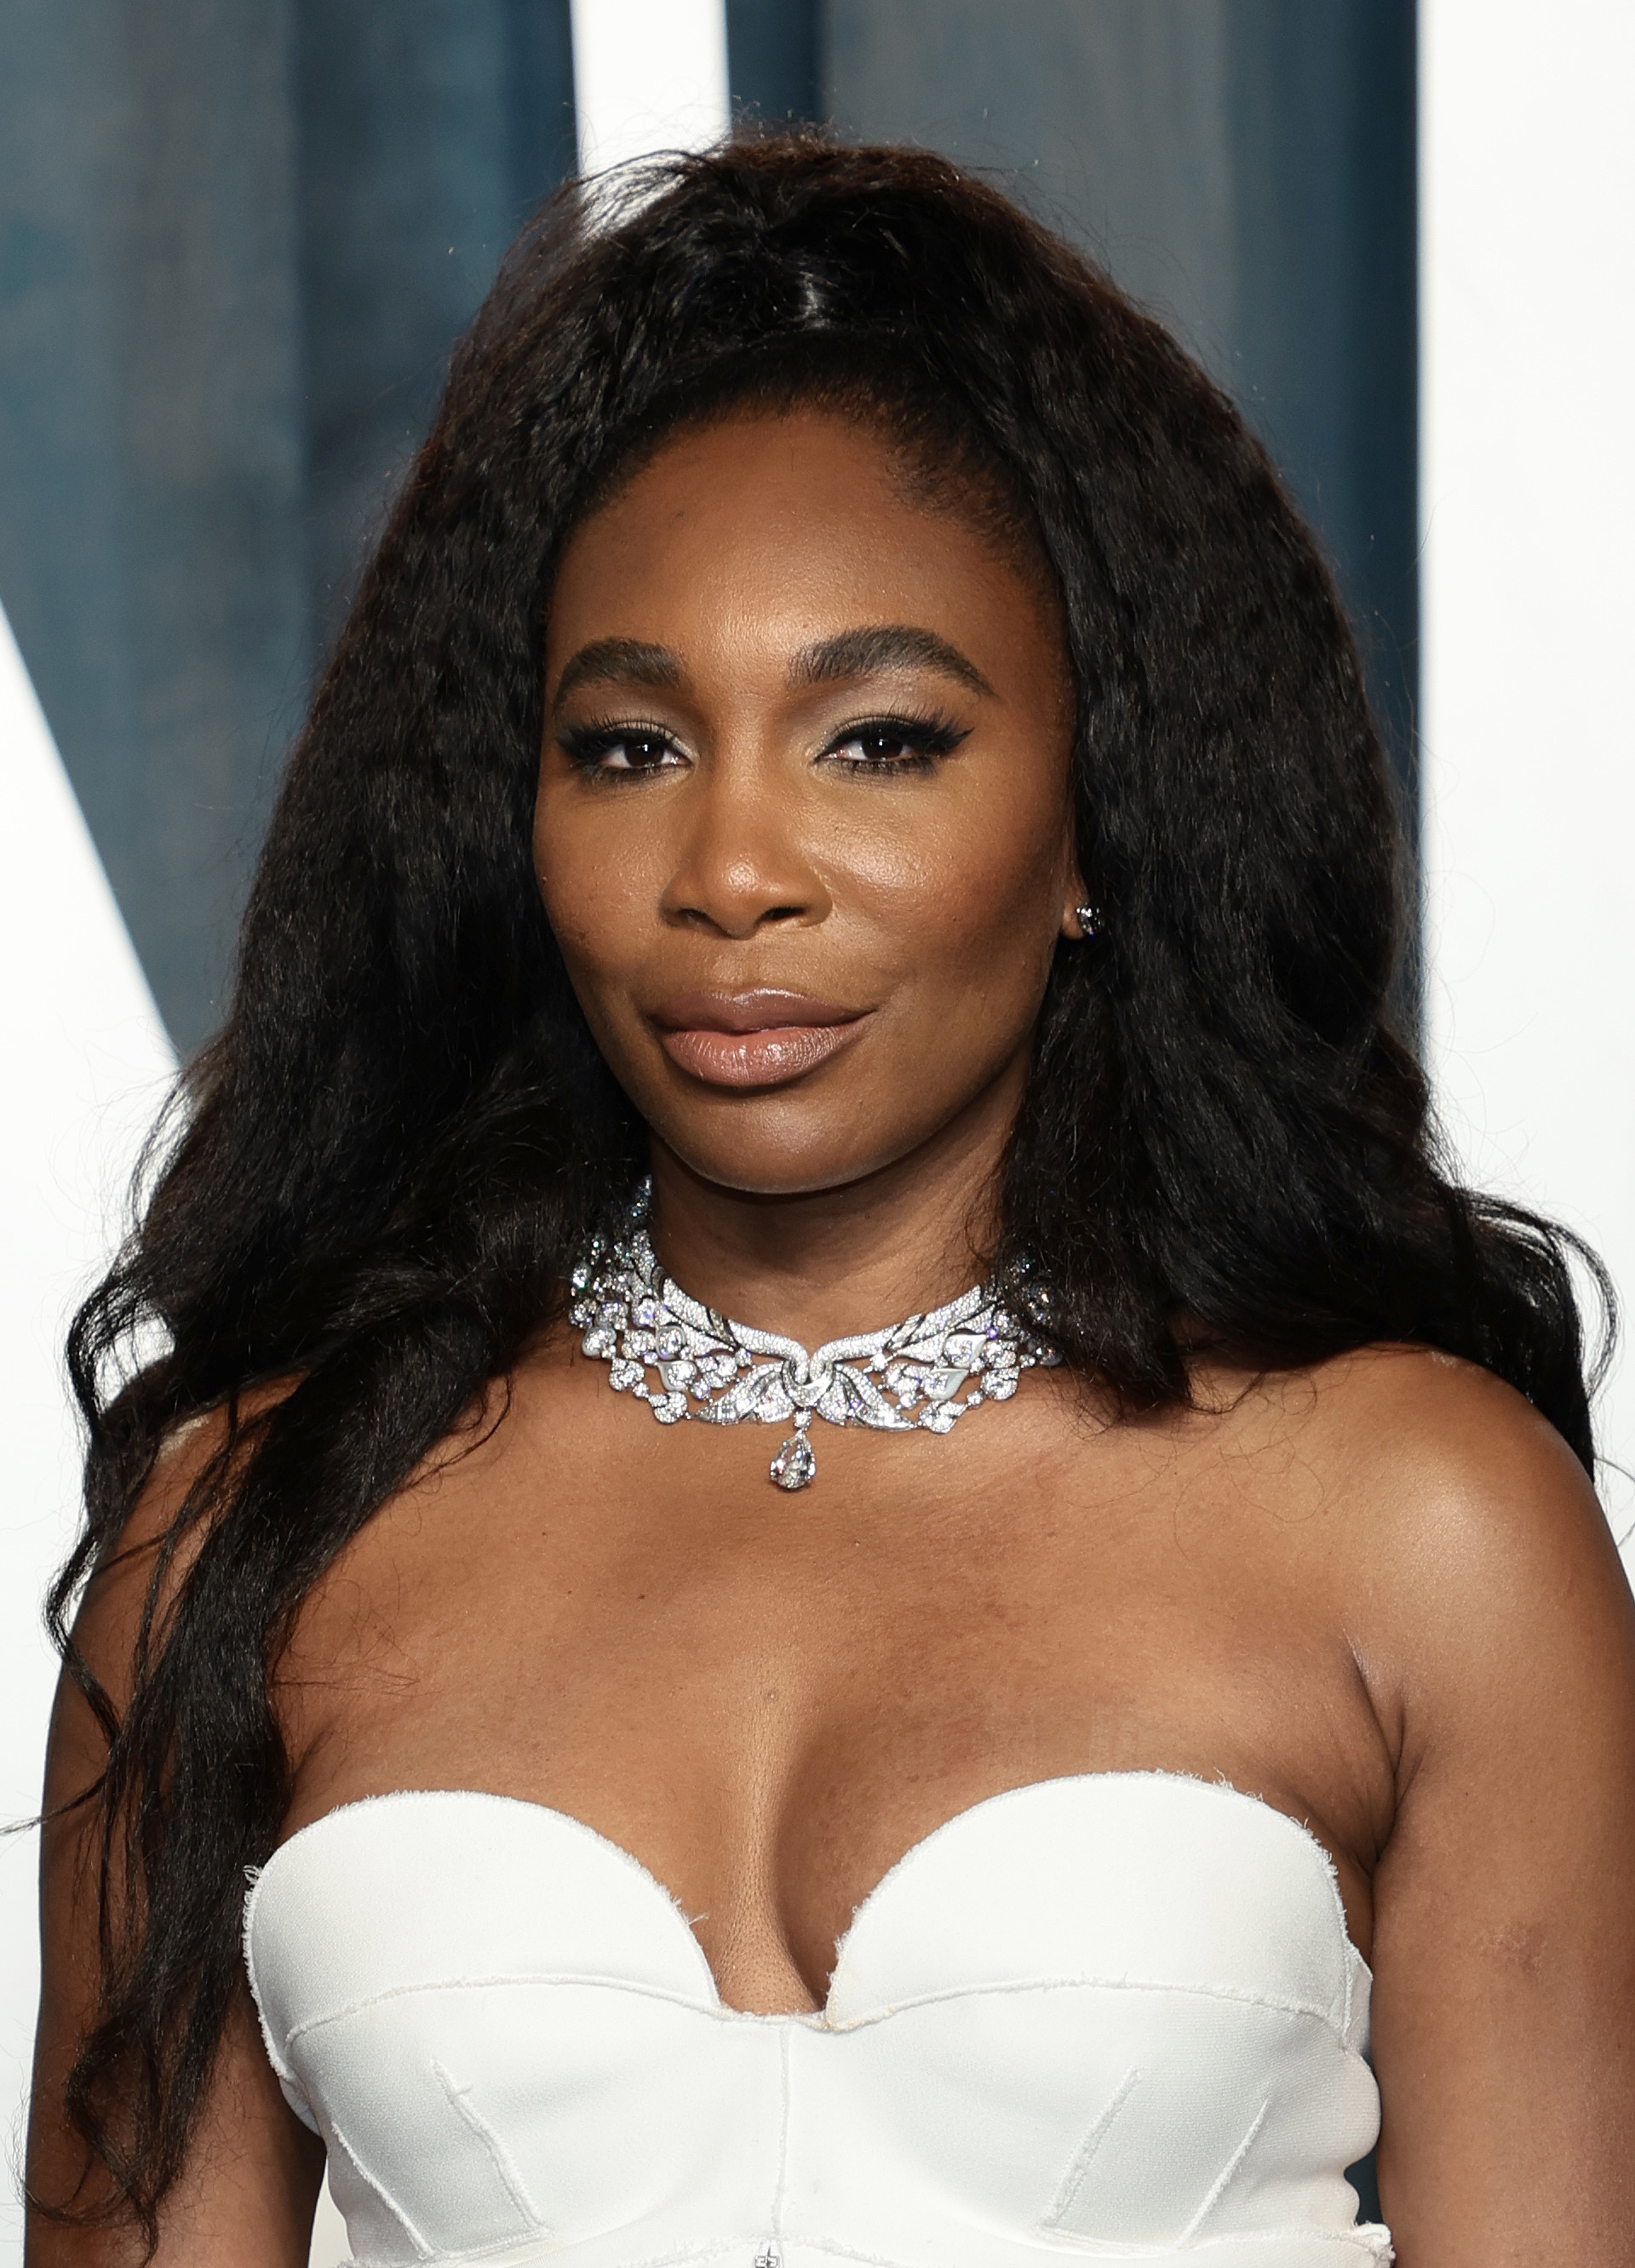 Venus Williams arrives at the Vanity Fair Oscar Party in March 2022